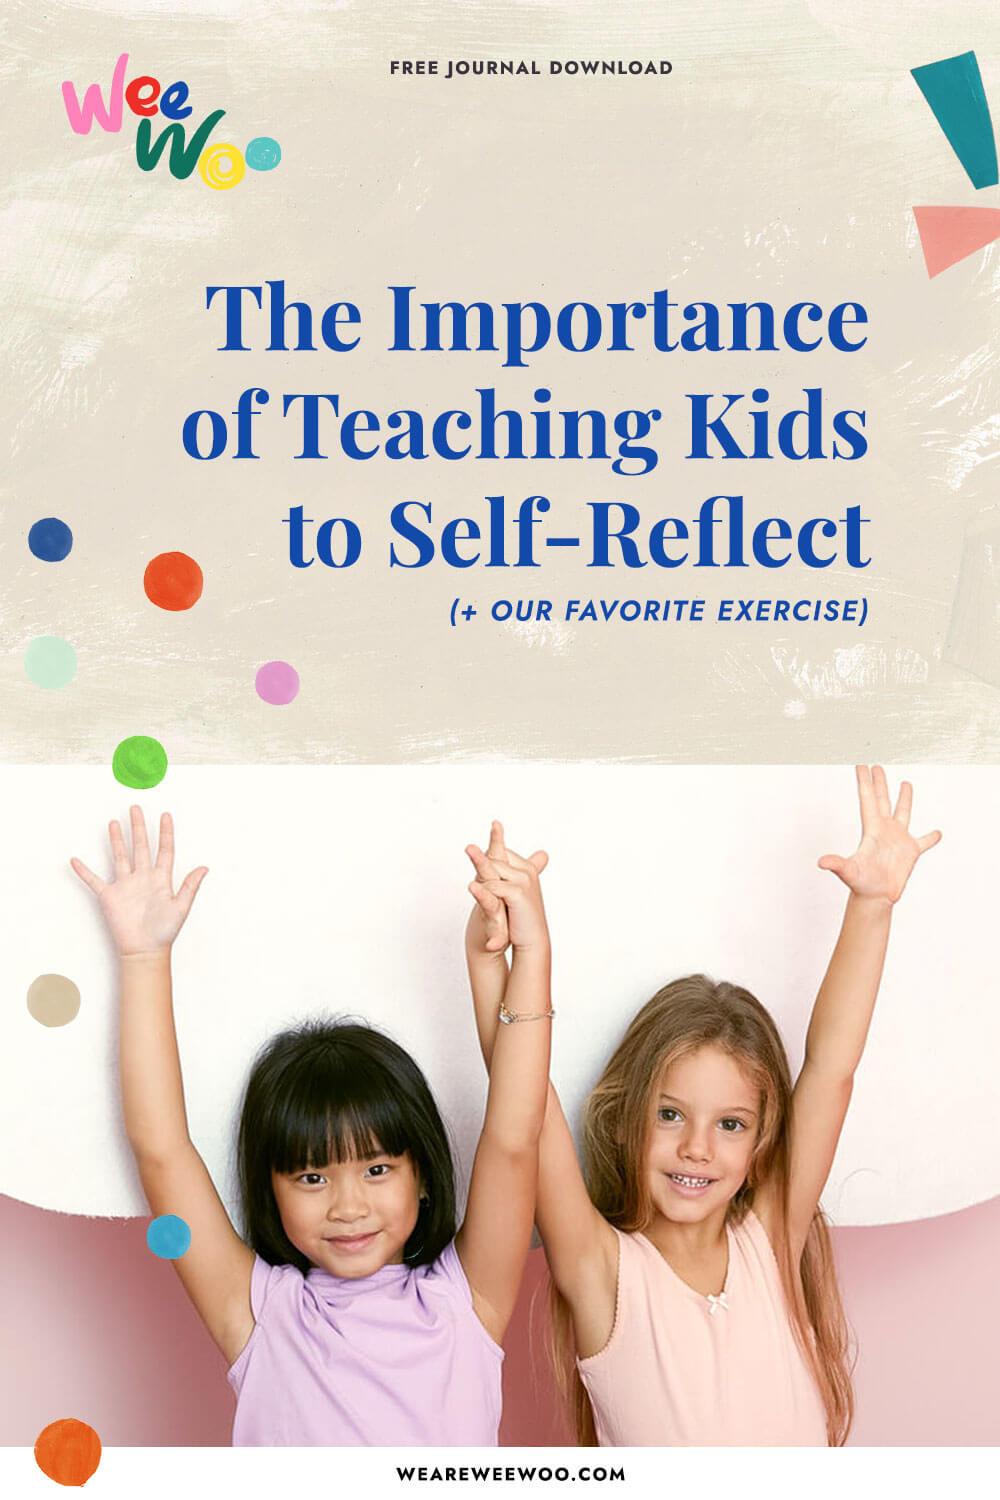 The Importance of Teaching Kids to Self-Reflect (+ our favorite exercise)